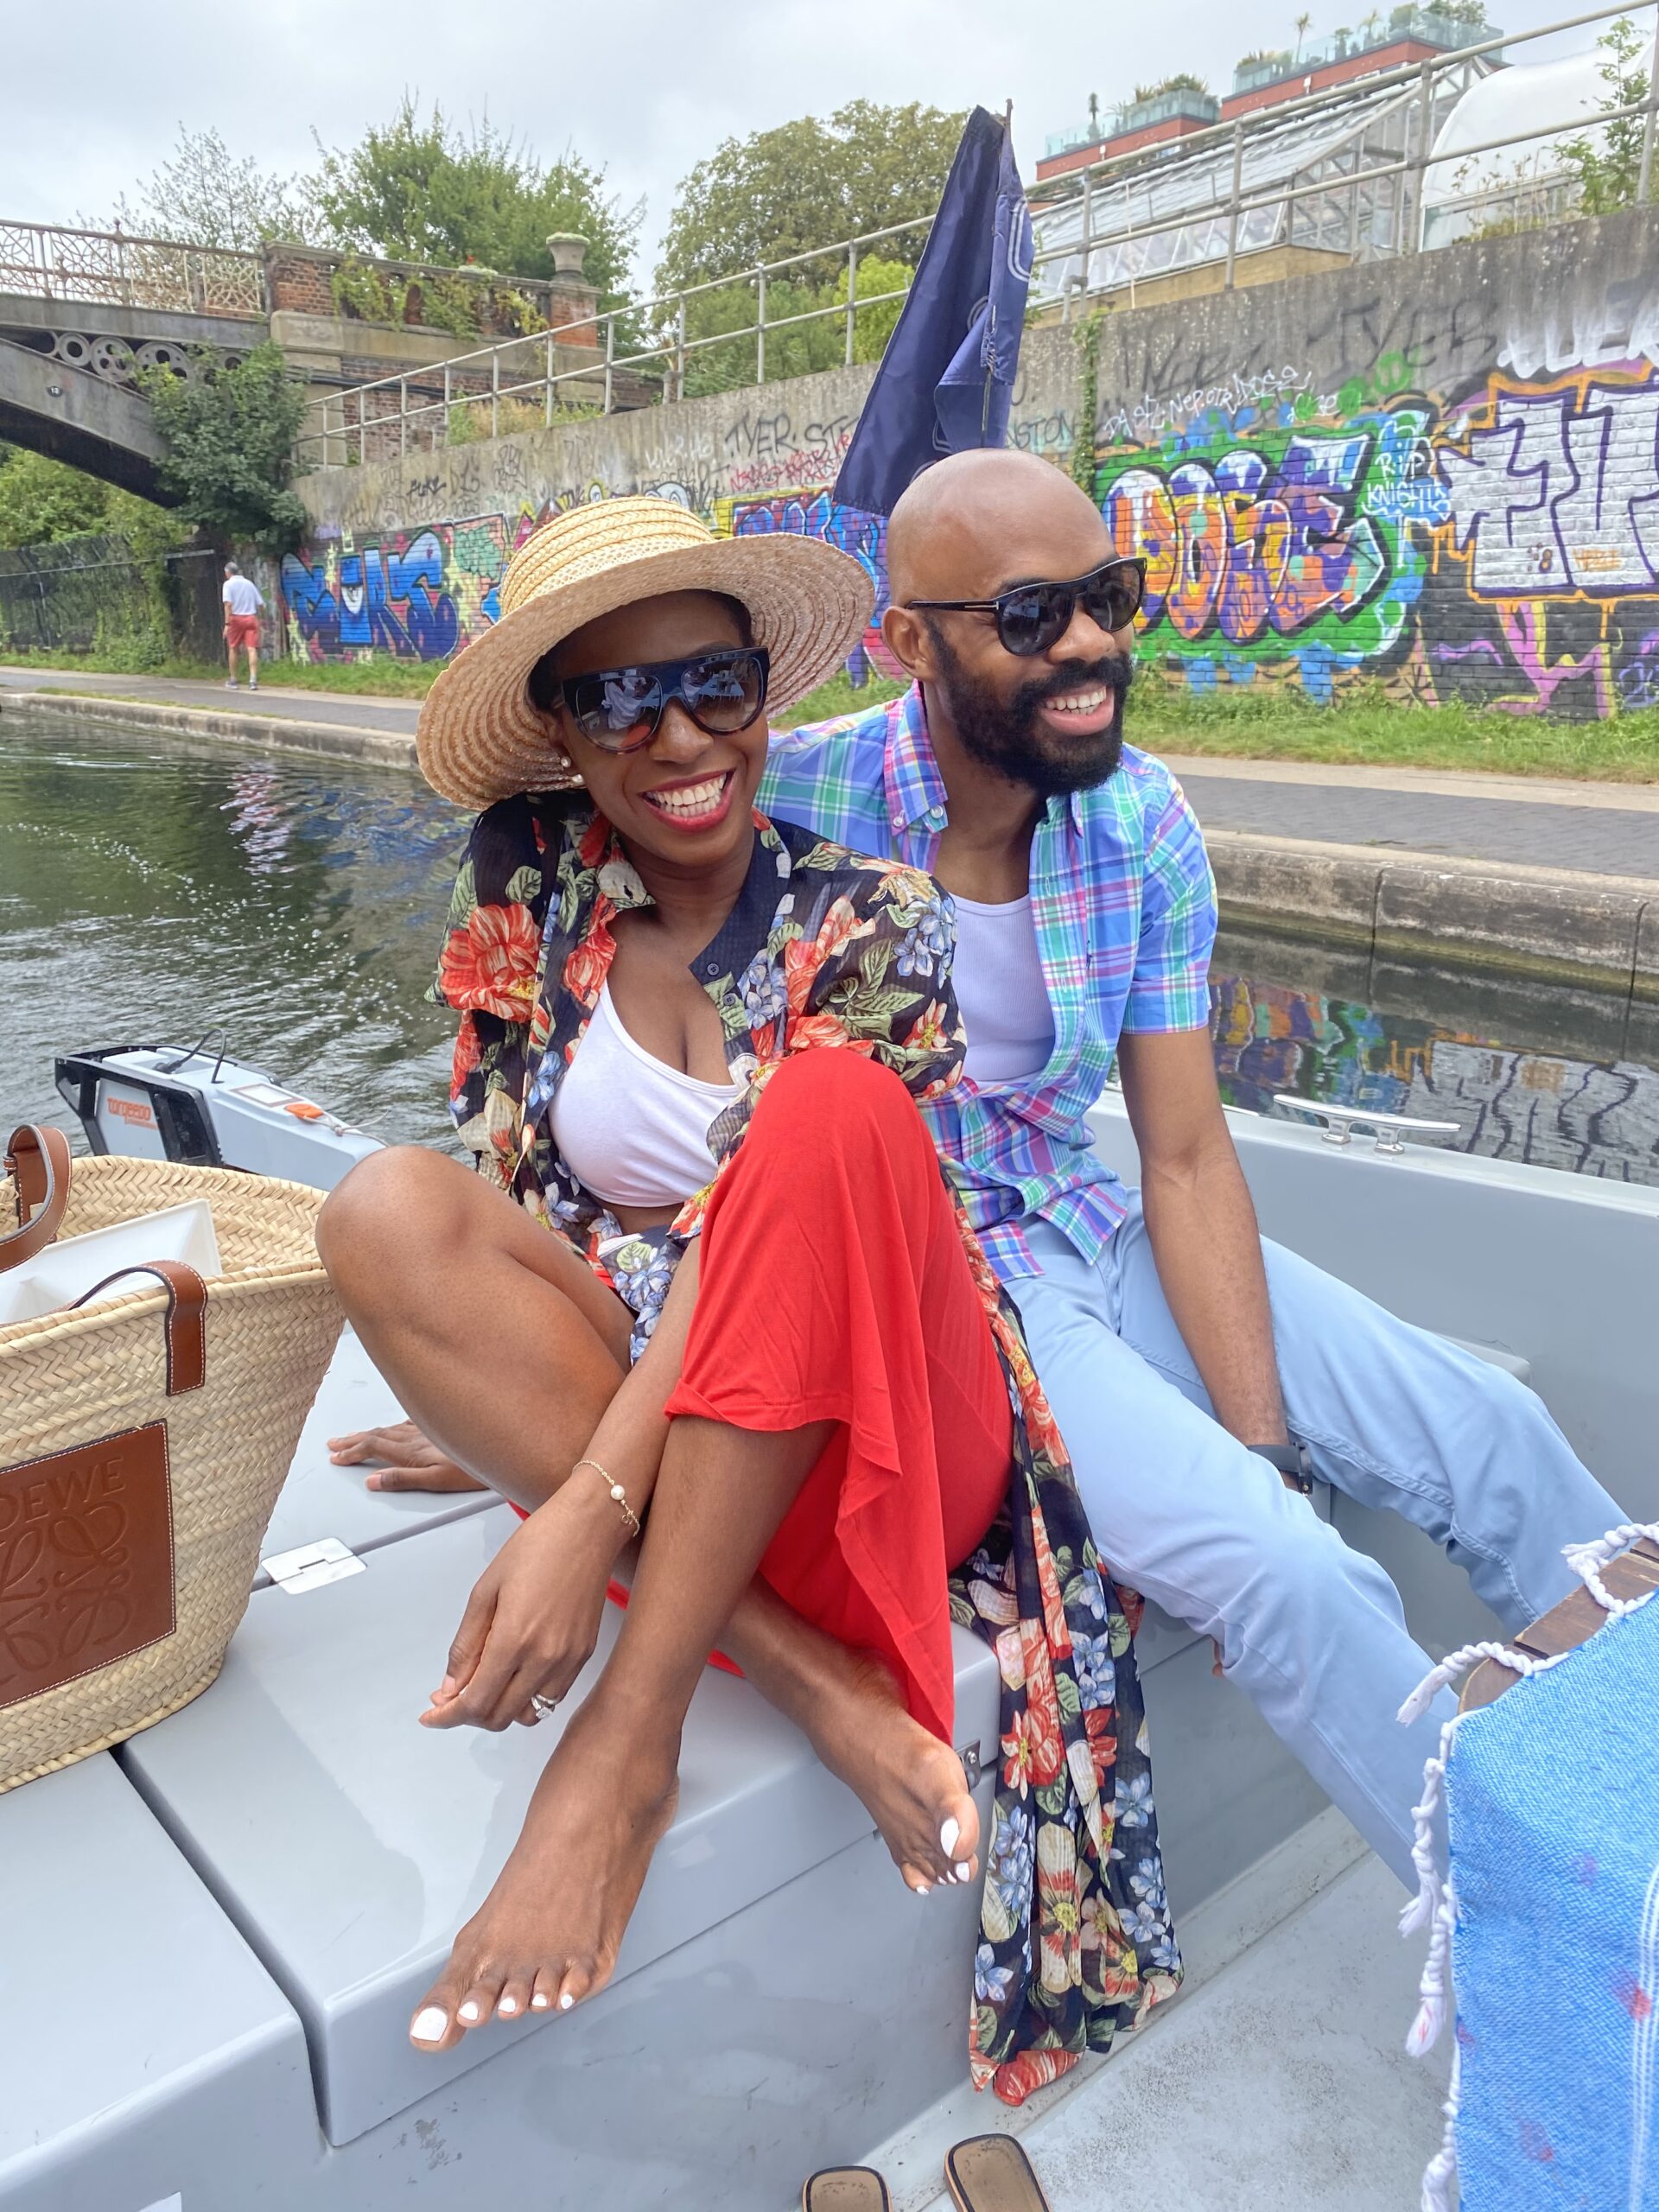 The Most Romantic Things to do in London - Canal cruise - Lifewithbugo